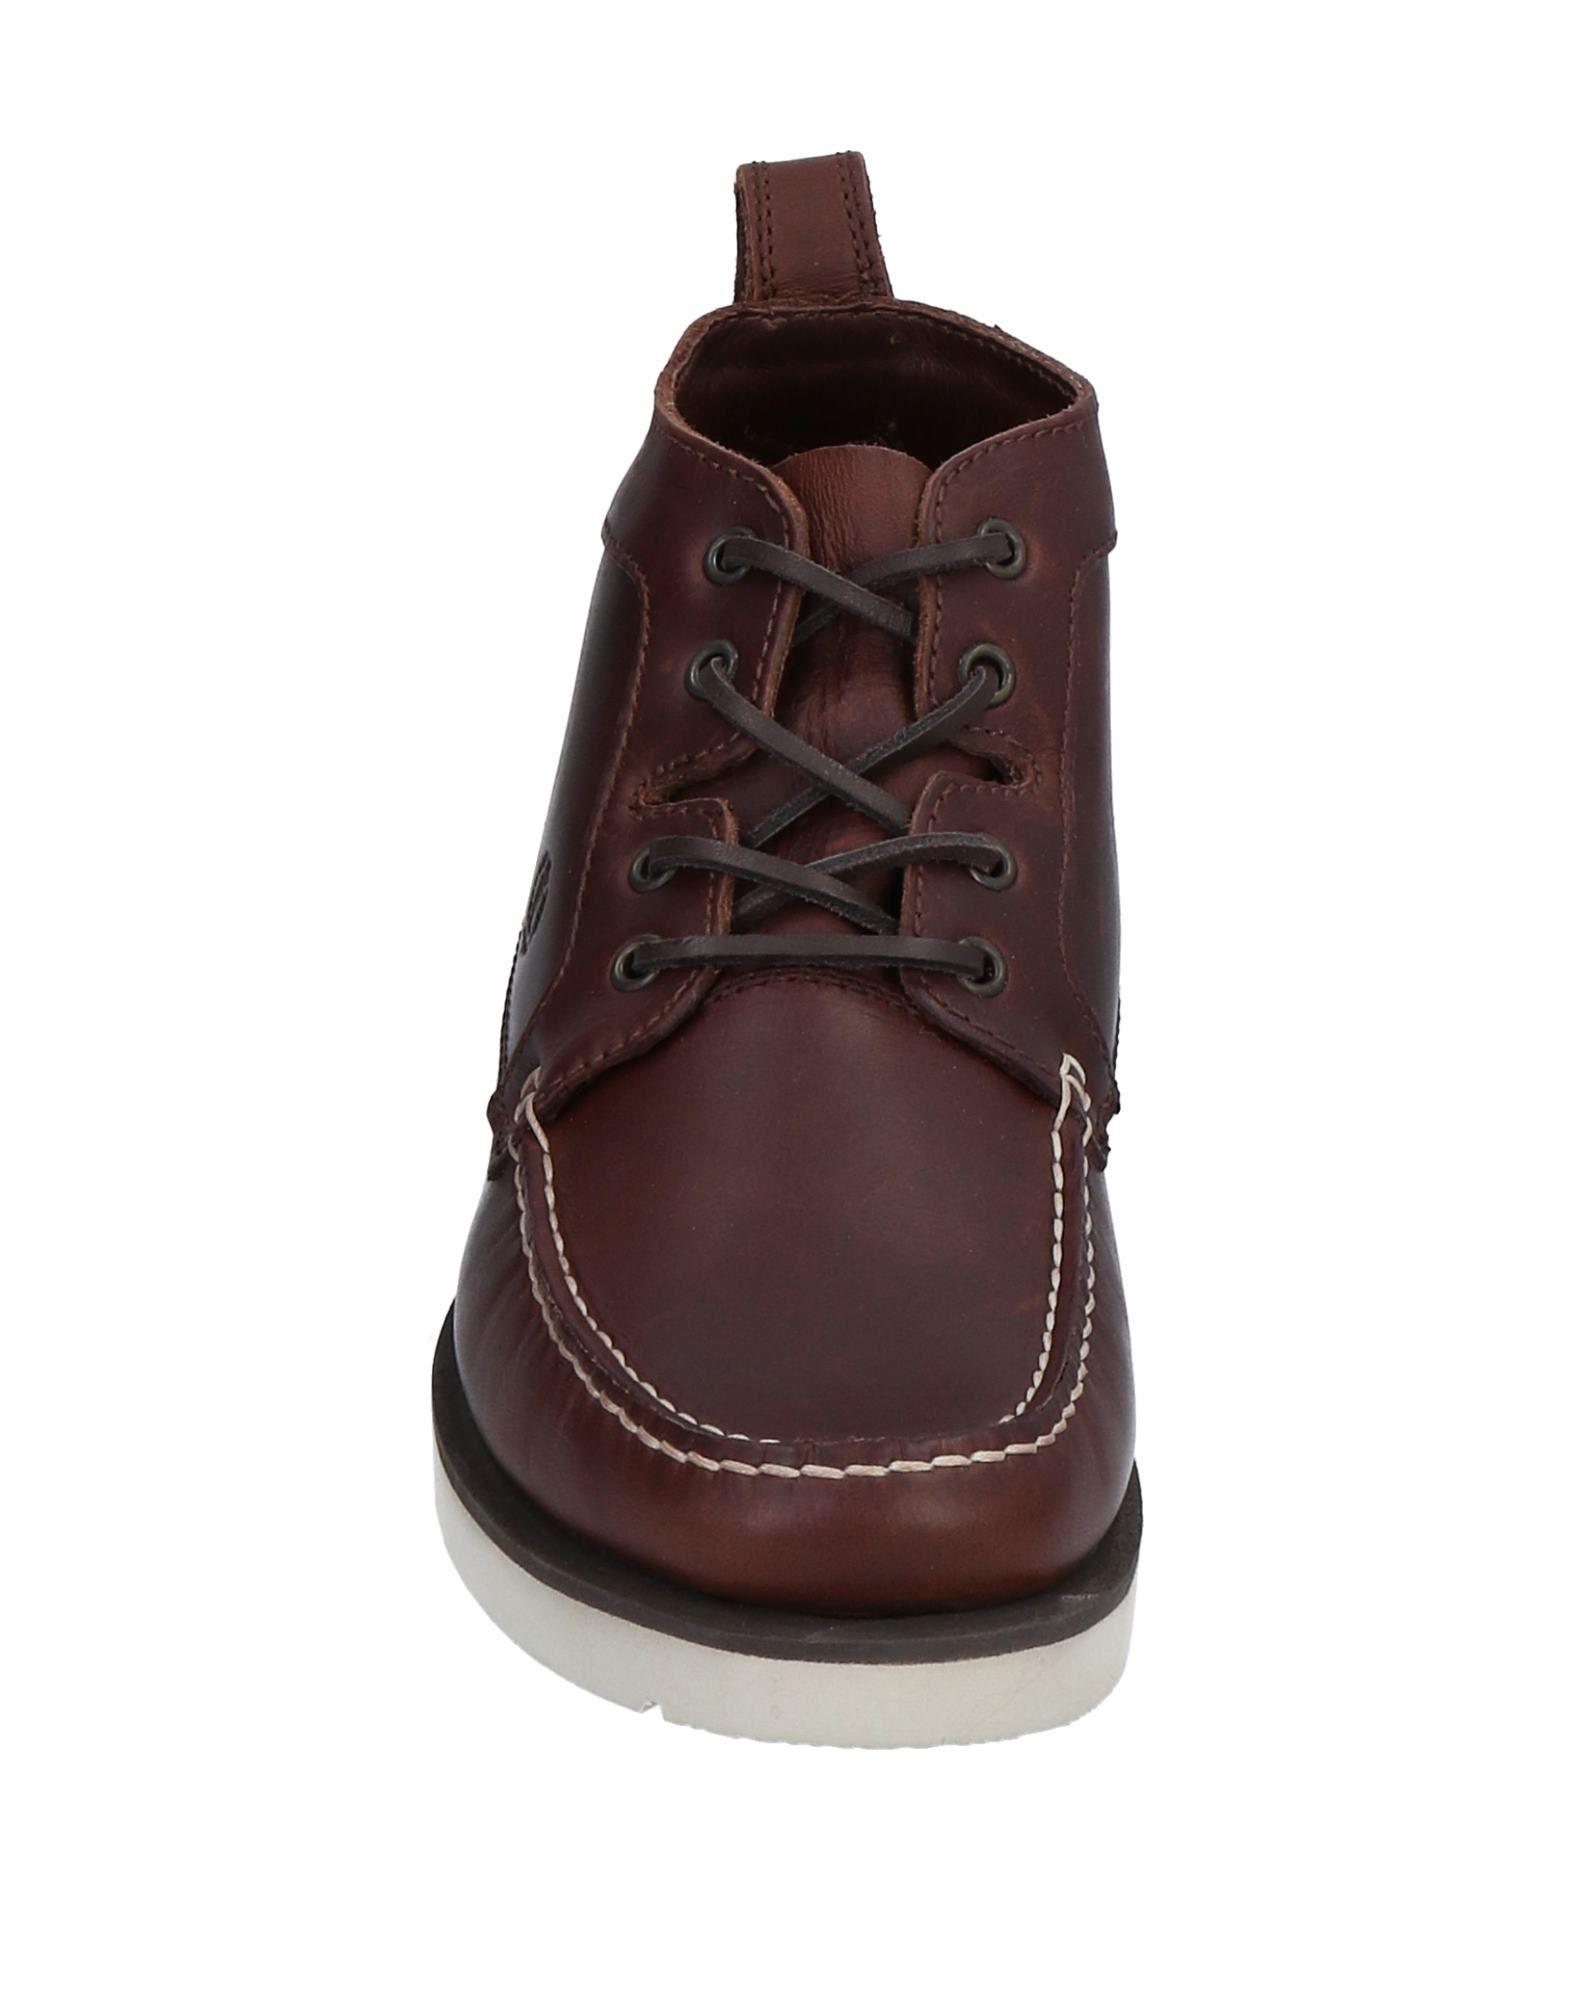 Henri Lloyd Leather Ankle Boots in Dark Brown (Brown) for Men - Lyst